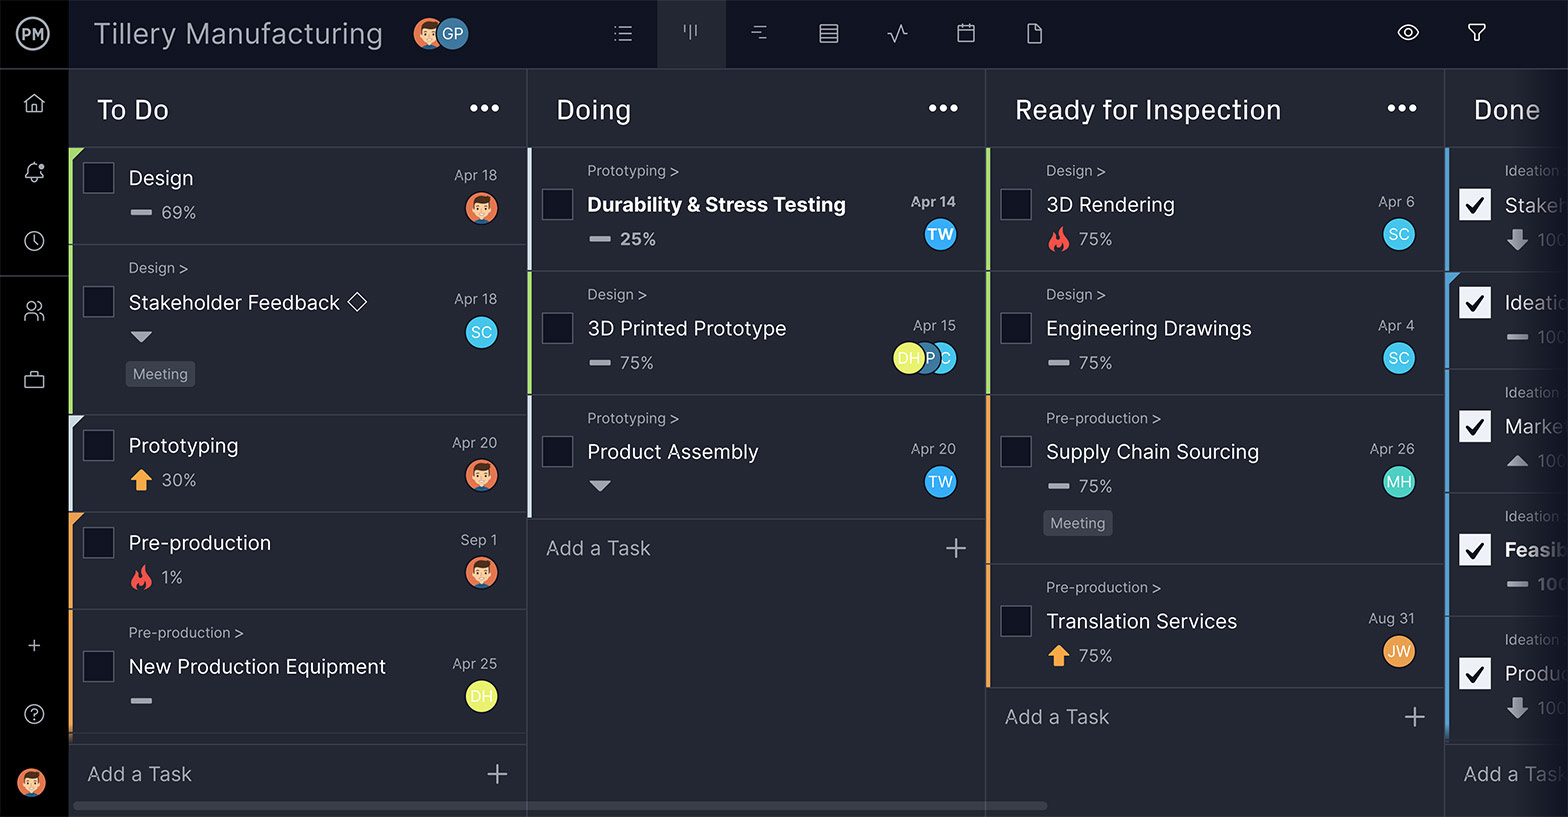 ProjectManager's kanban boards are ideal to manage tasks while executing work orders